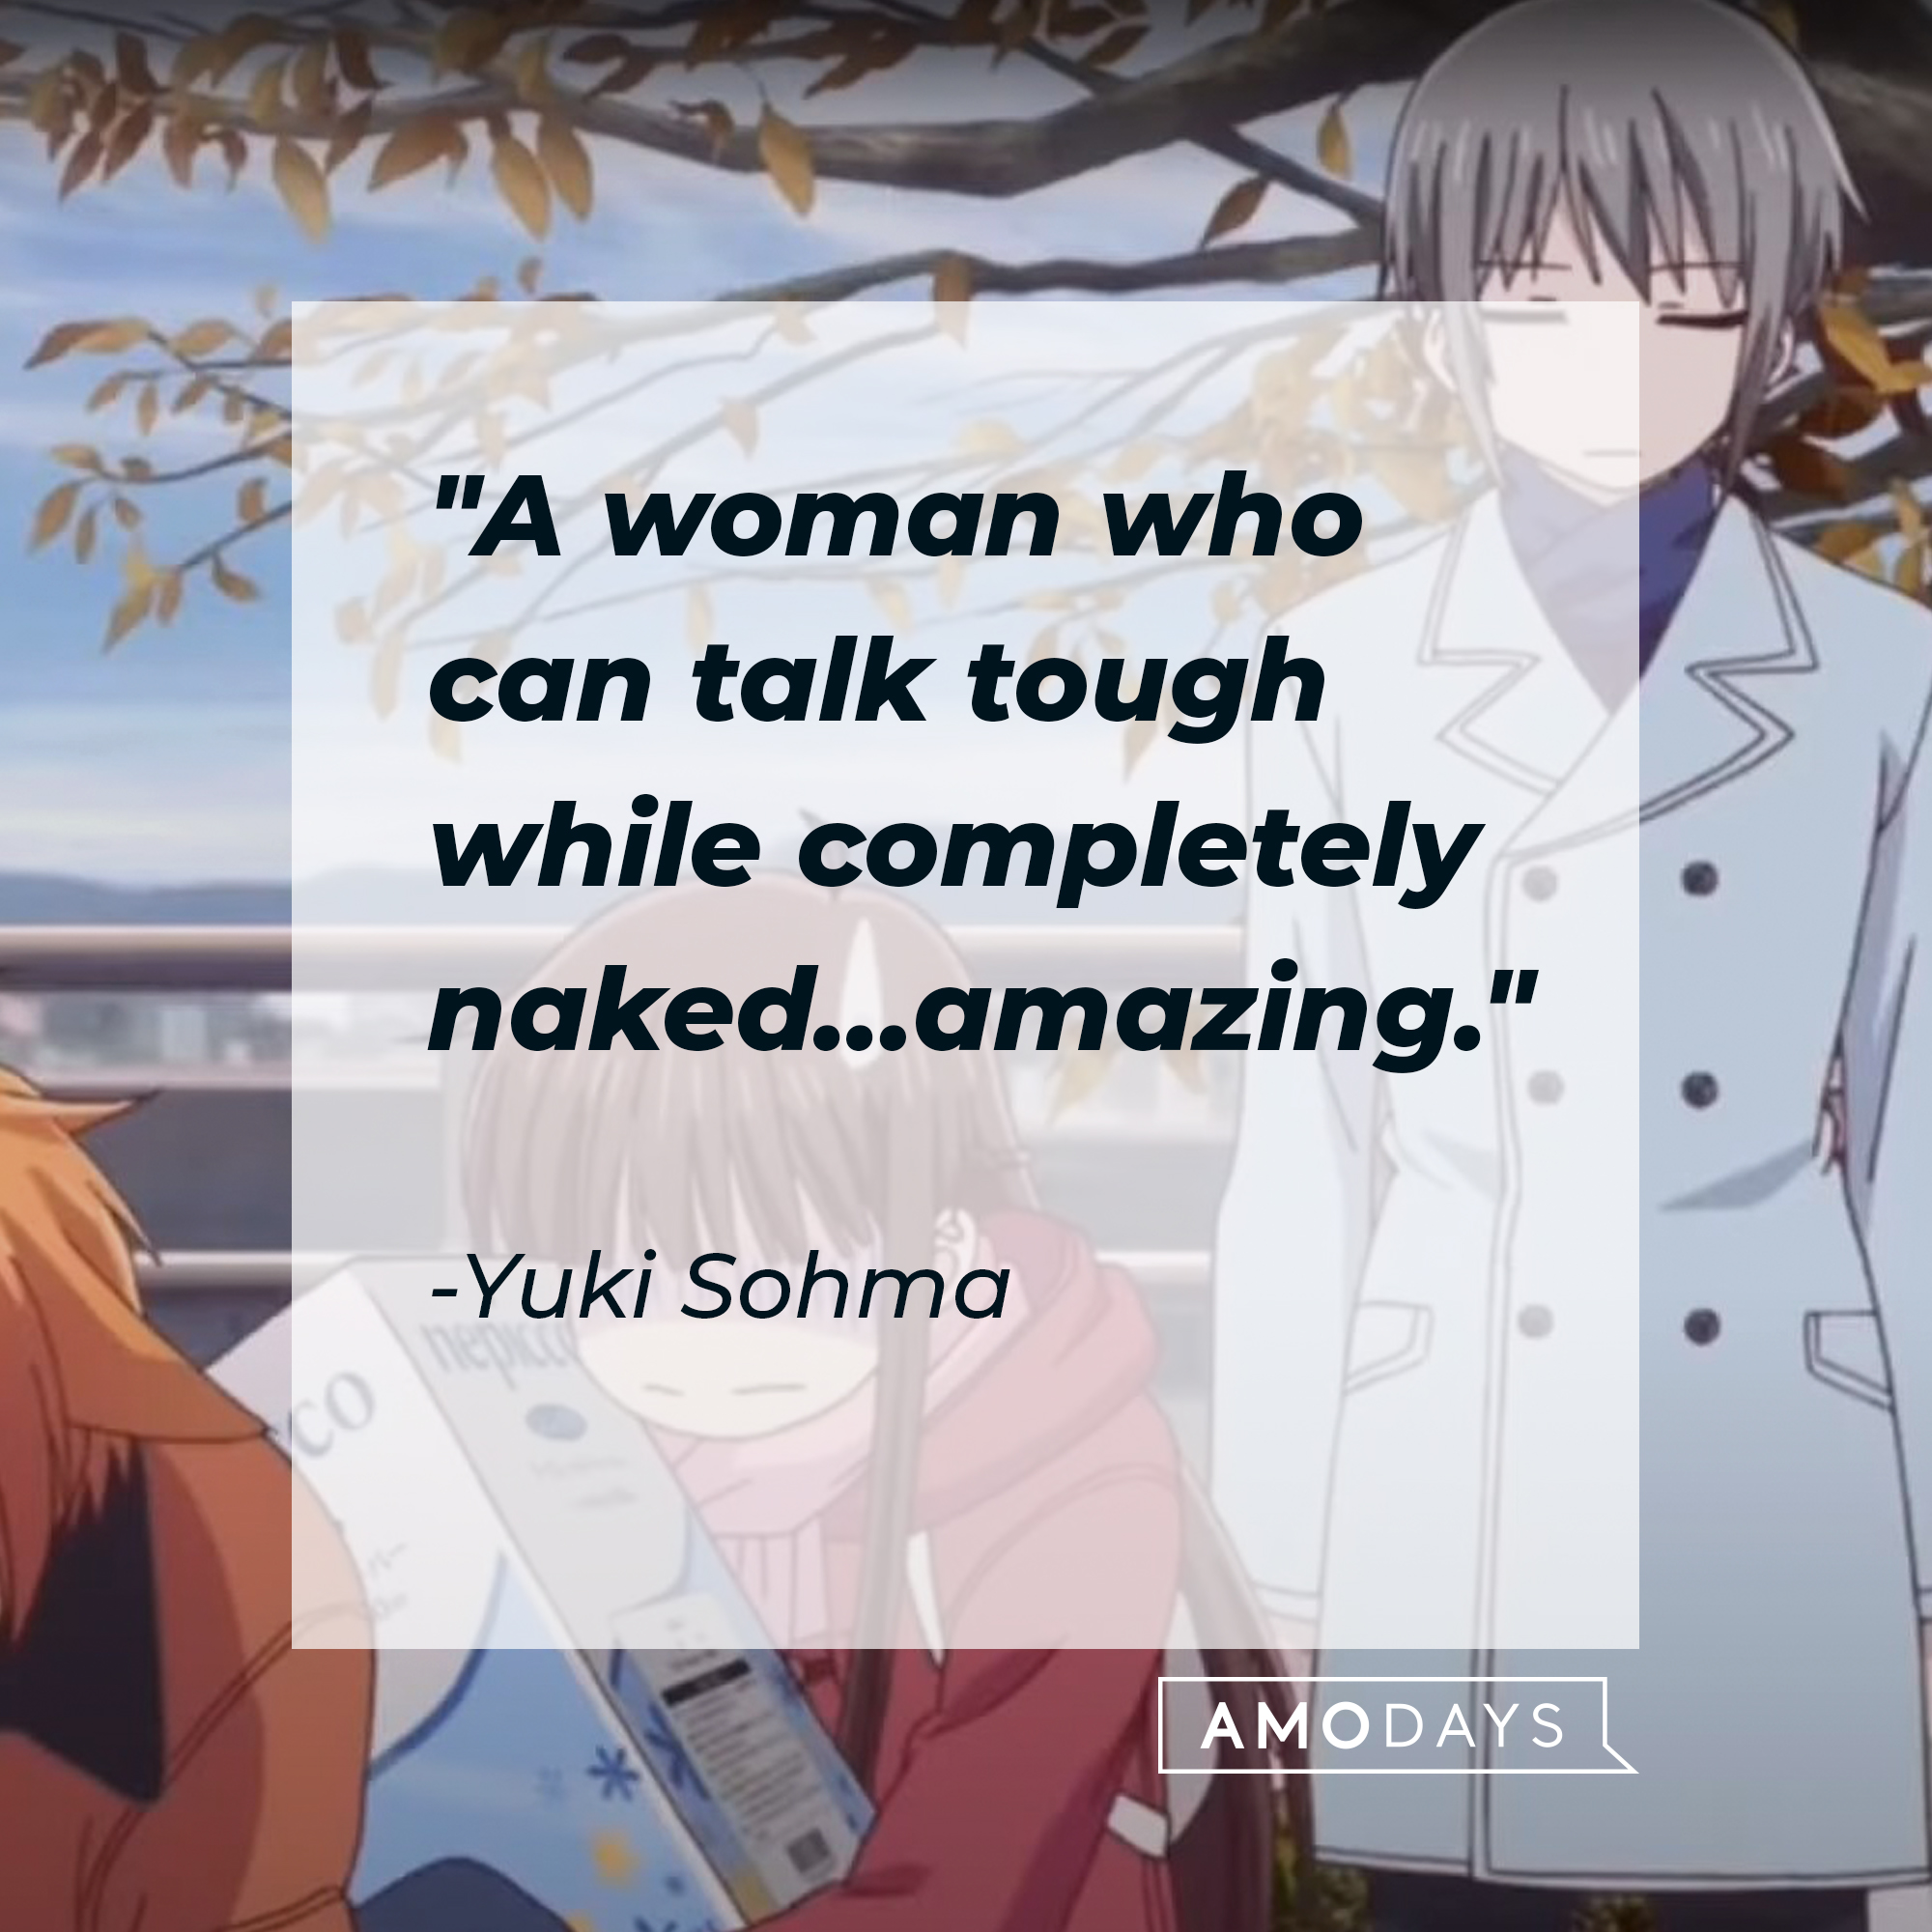 Yuki Sohma's quote: "A woman who can talk tough while completely naked…amazing." | Source: Facebook.com/FruitsBasketOfficial